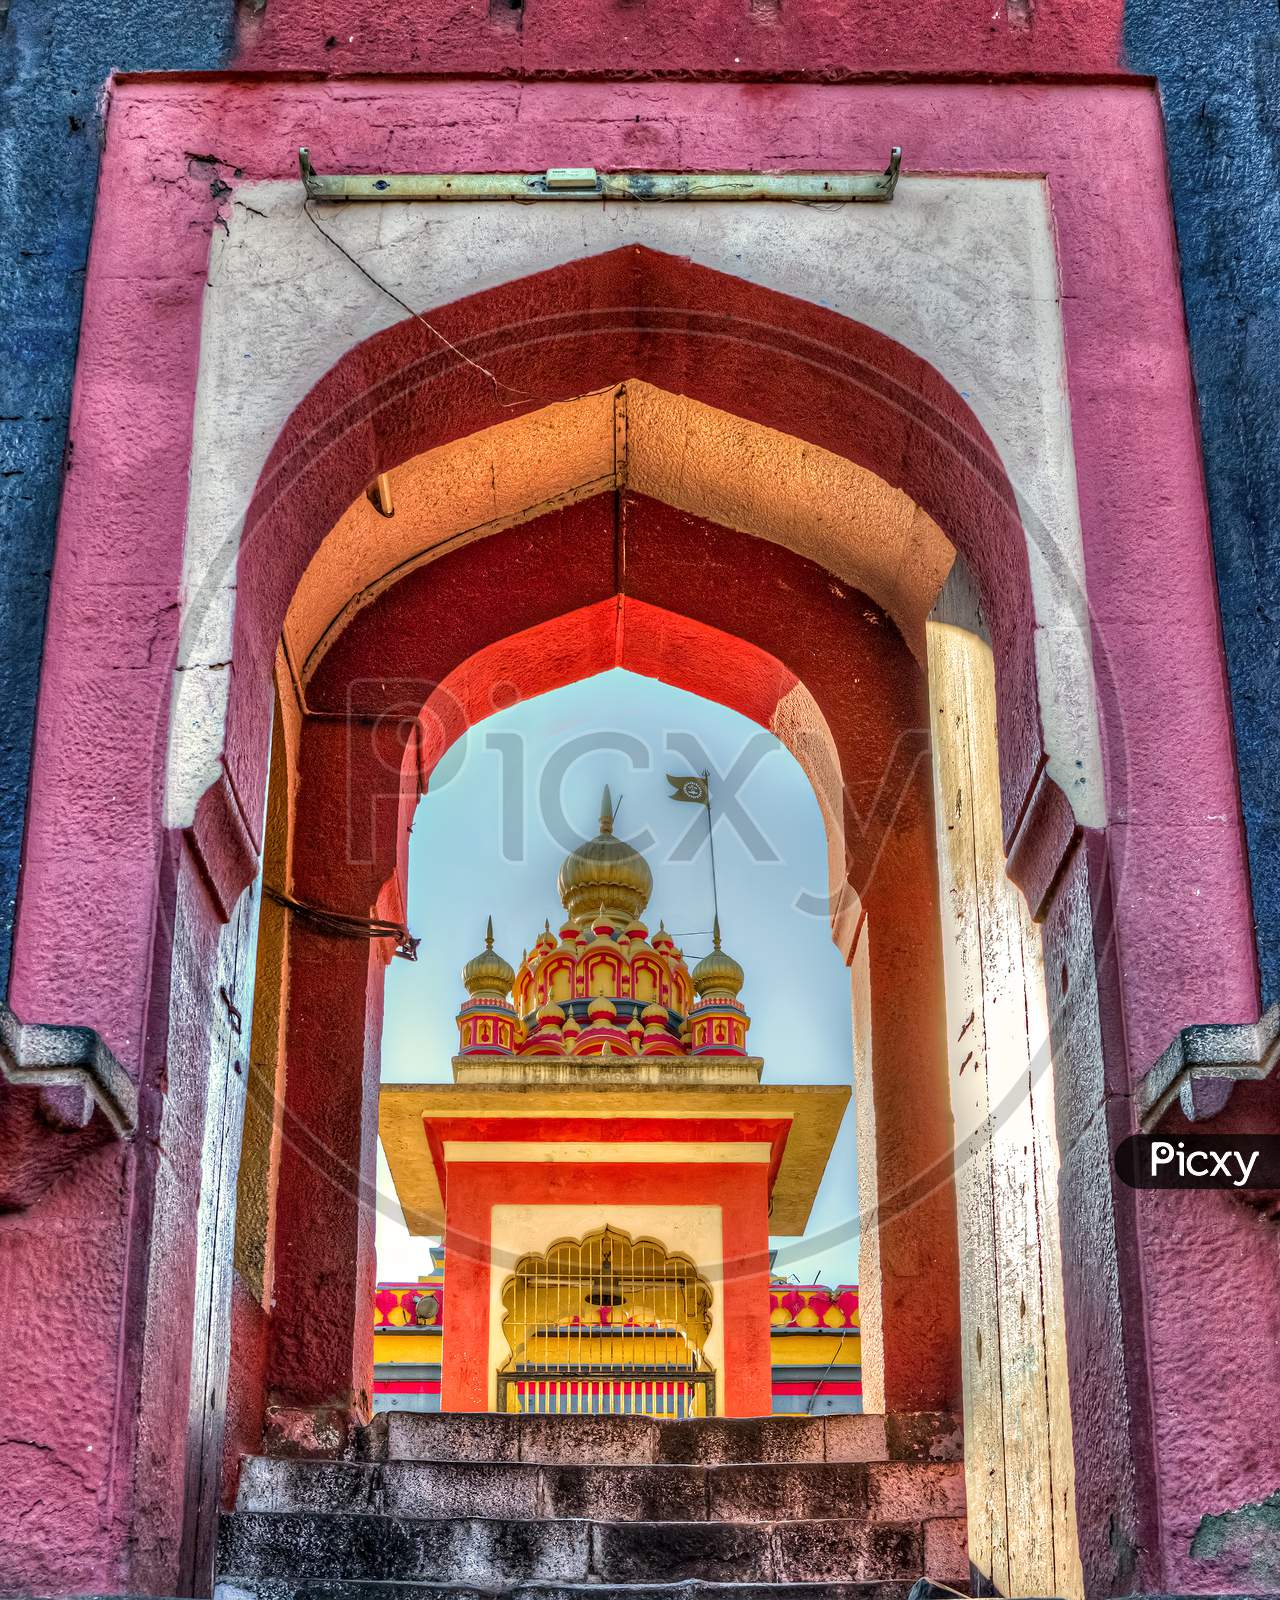 Colorful Entrance Of Oldest Heritage Structure In Pune - Parvati Mahadeo Temple.